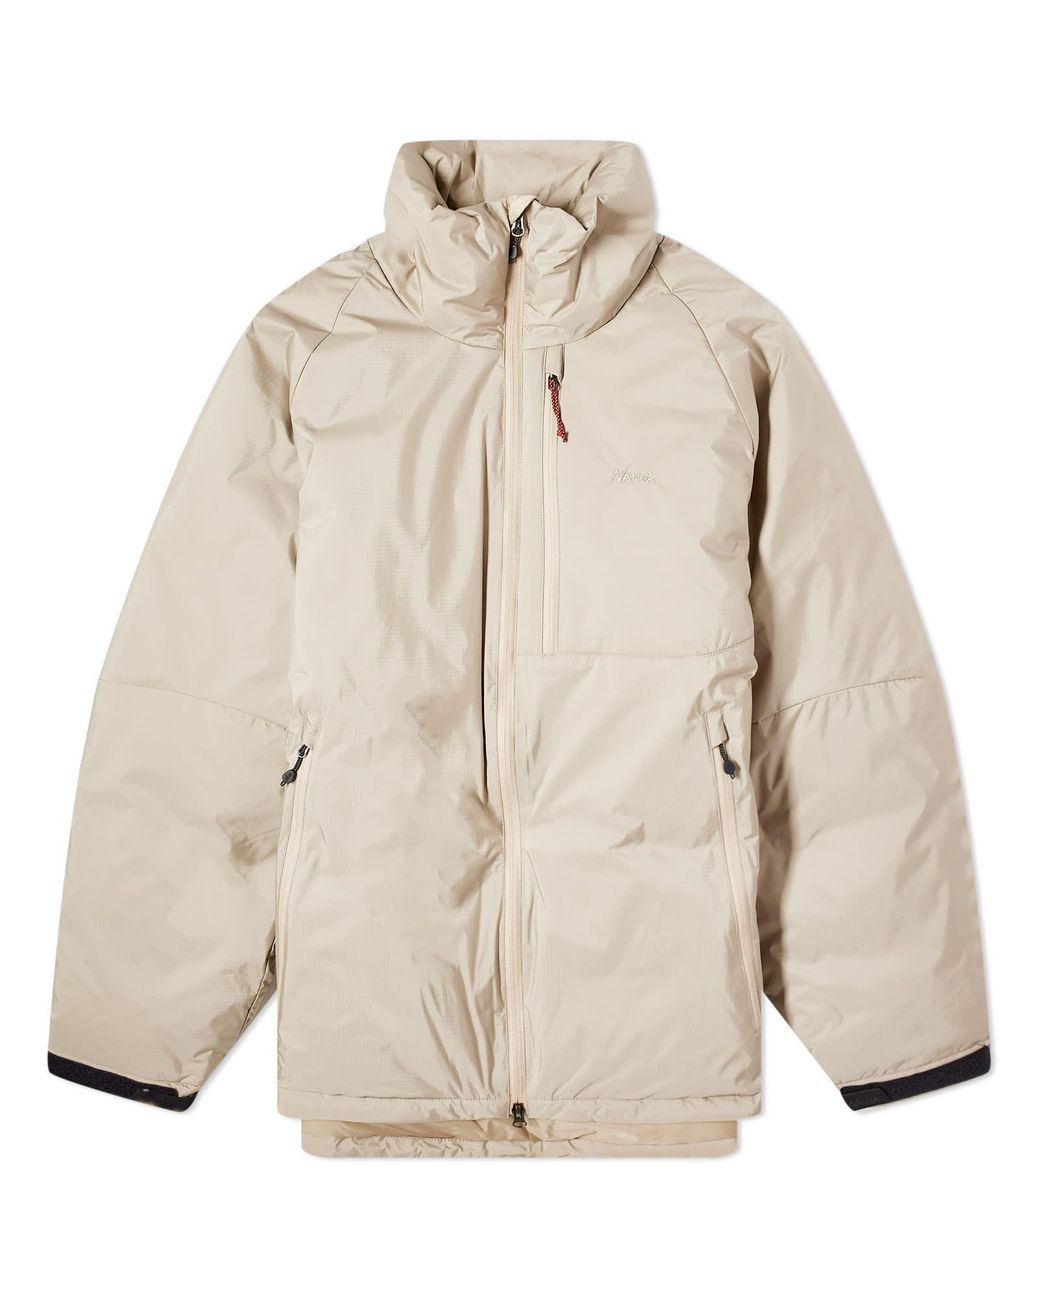 NANGA Aurora Stand Collar Down Jacket in Natural for Men | Lyst Canada